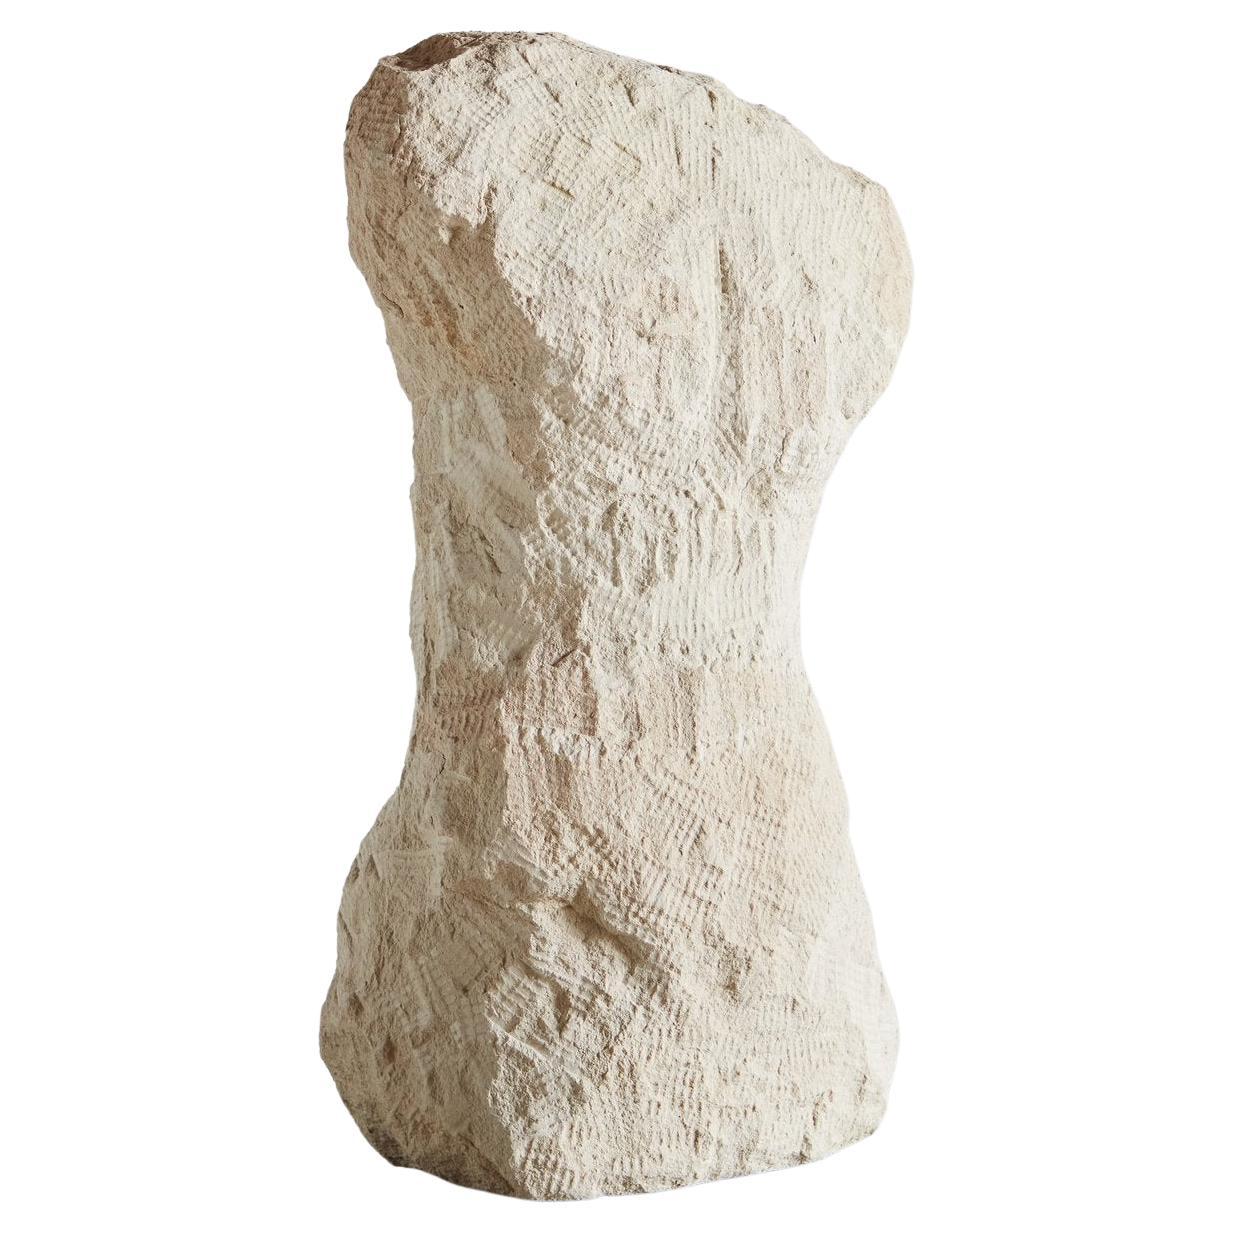 Abstract Figural Limestone Sculpture, France 1980s